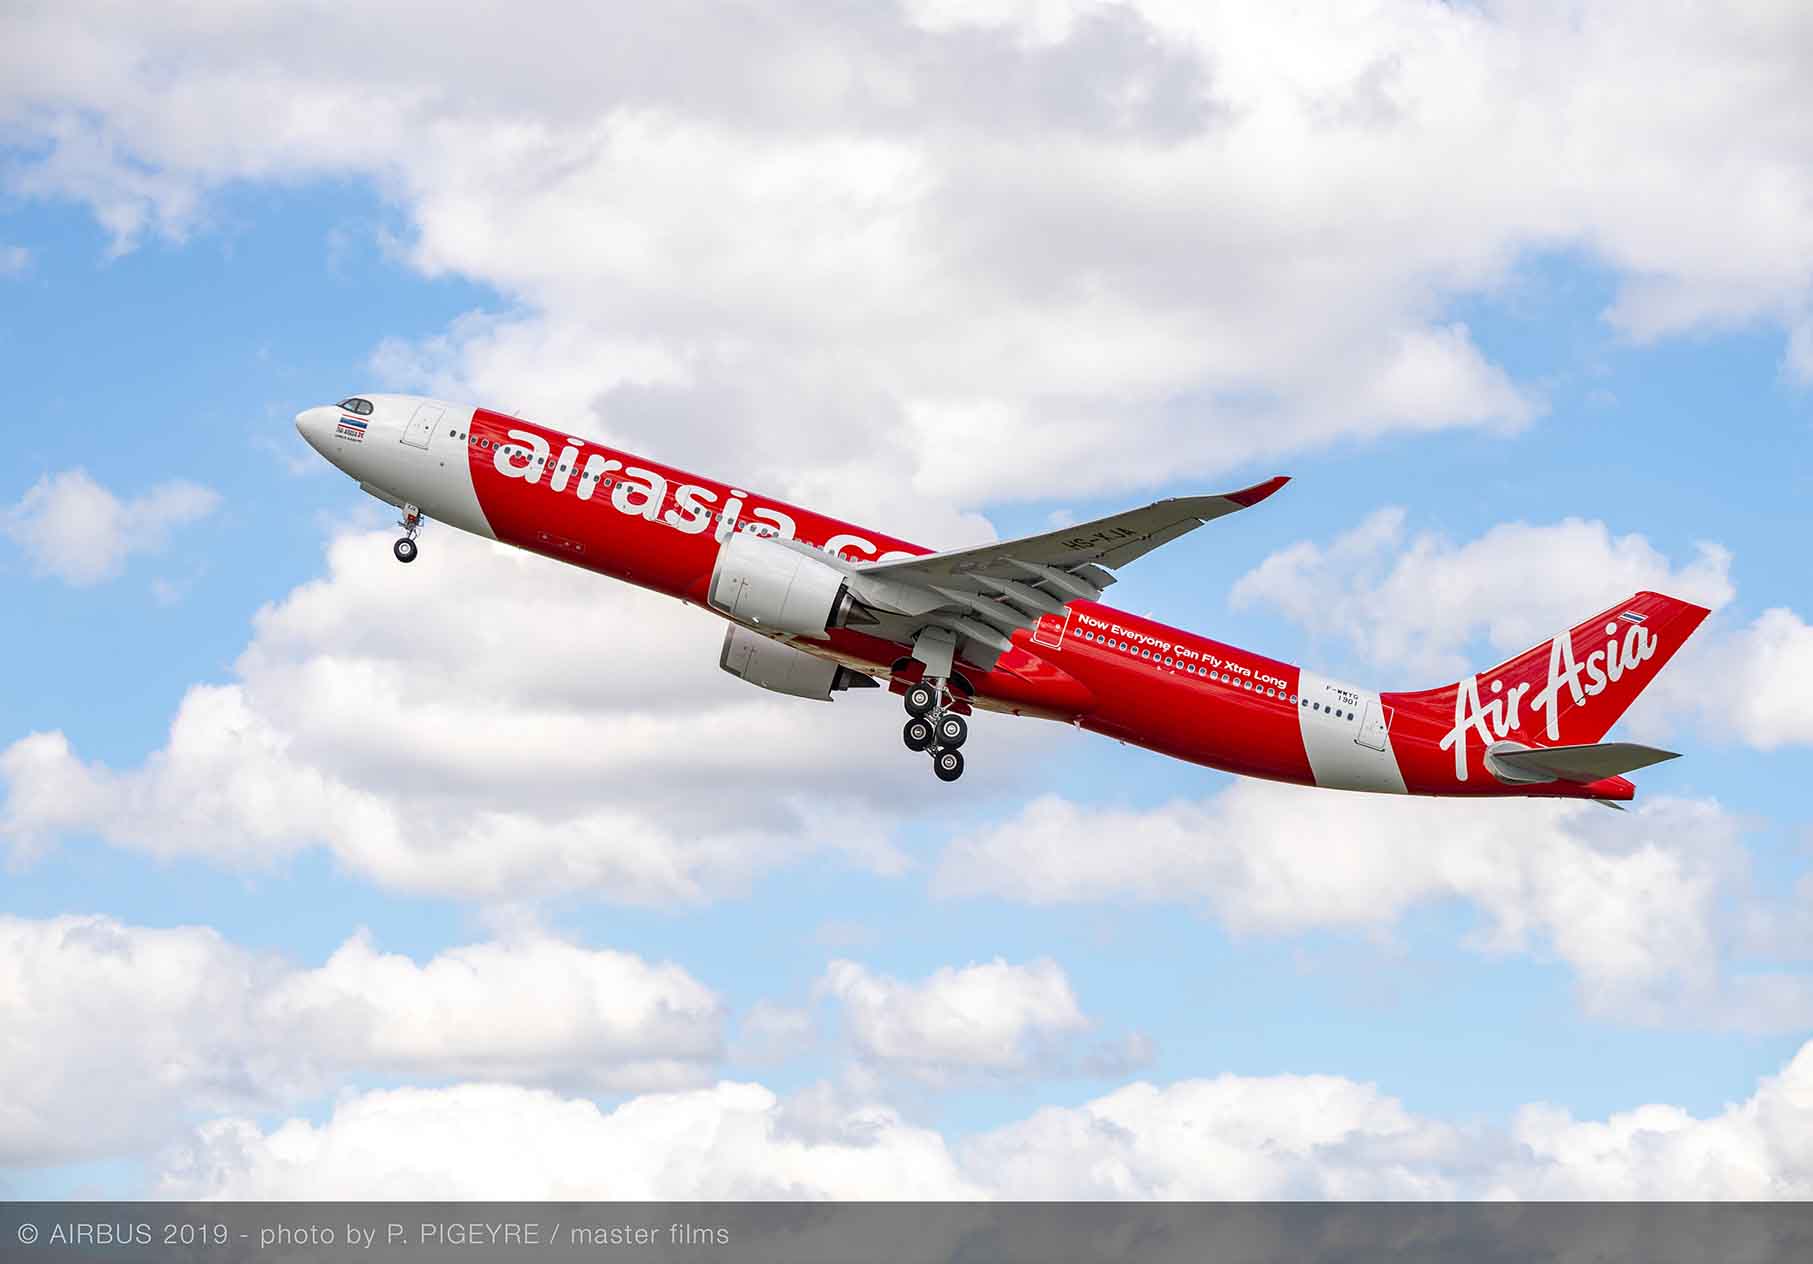 AirAsia Malaysia to offer direct connectivity to Kertajati, Indonesia, expands China network